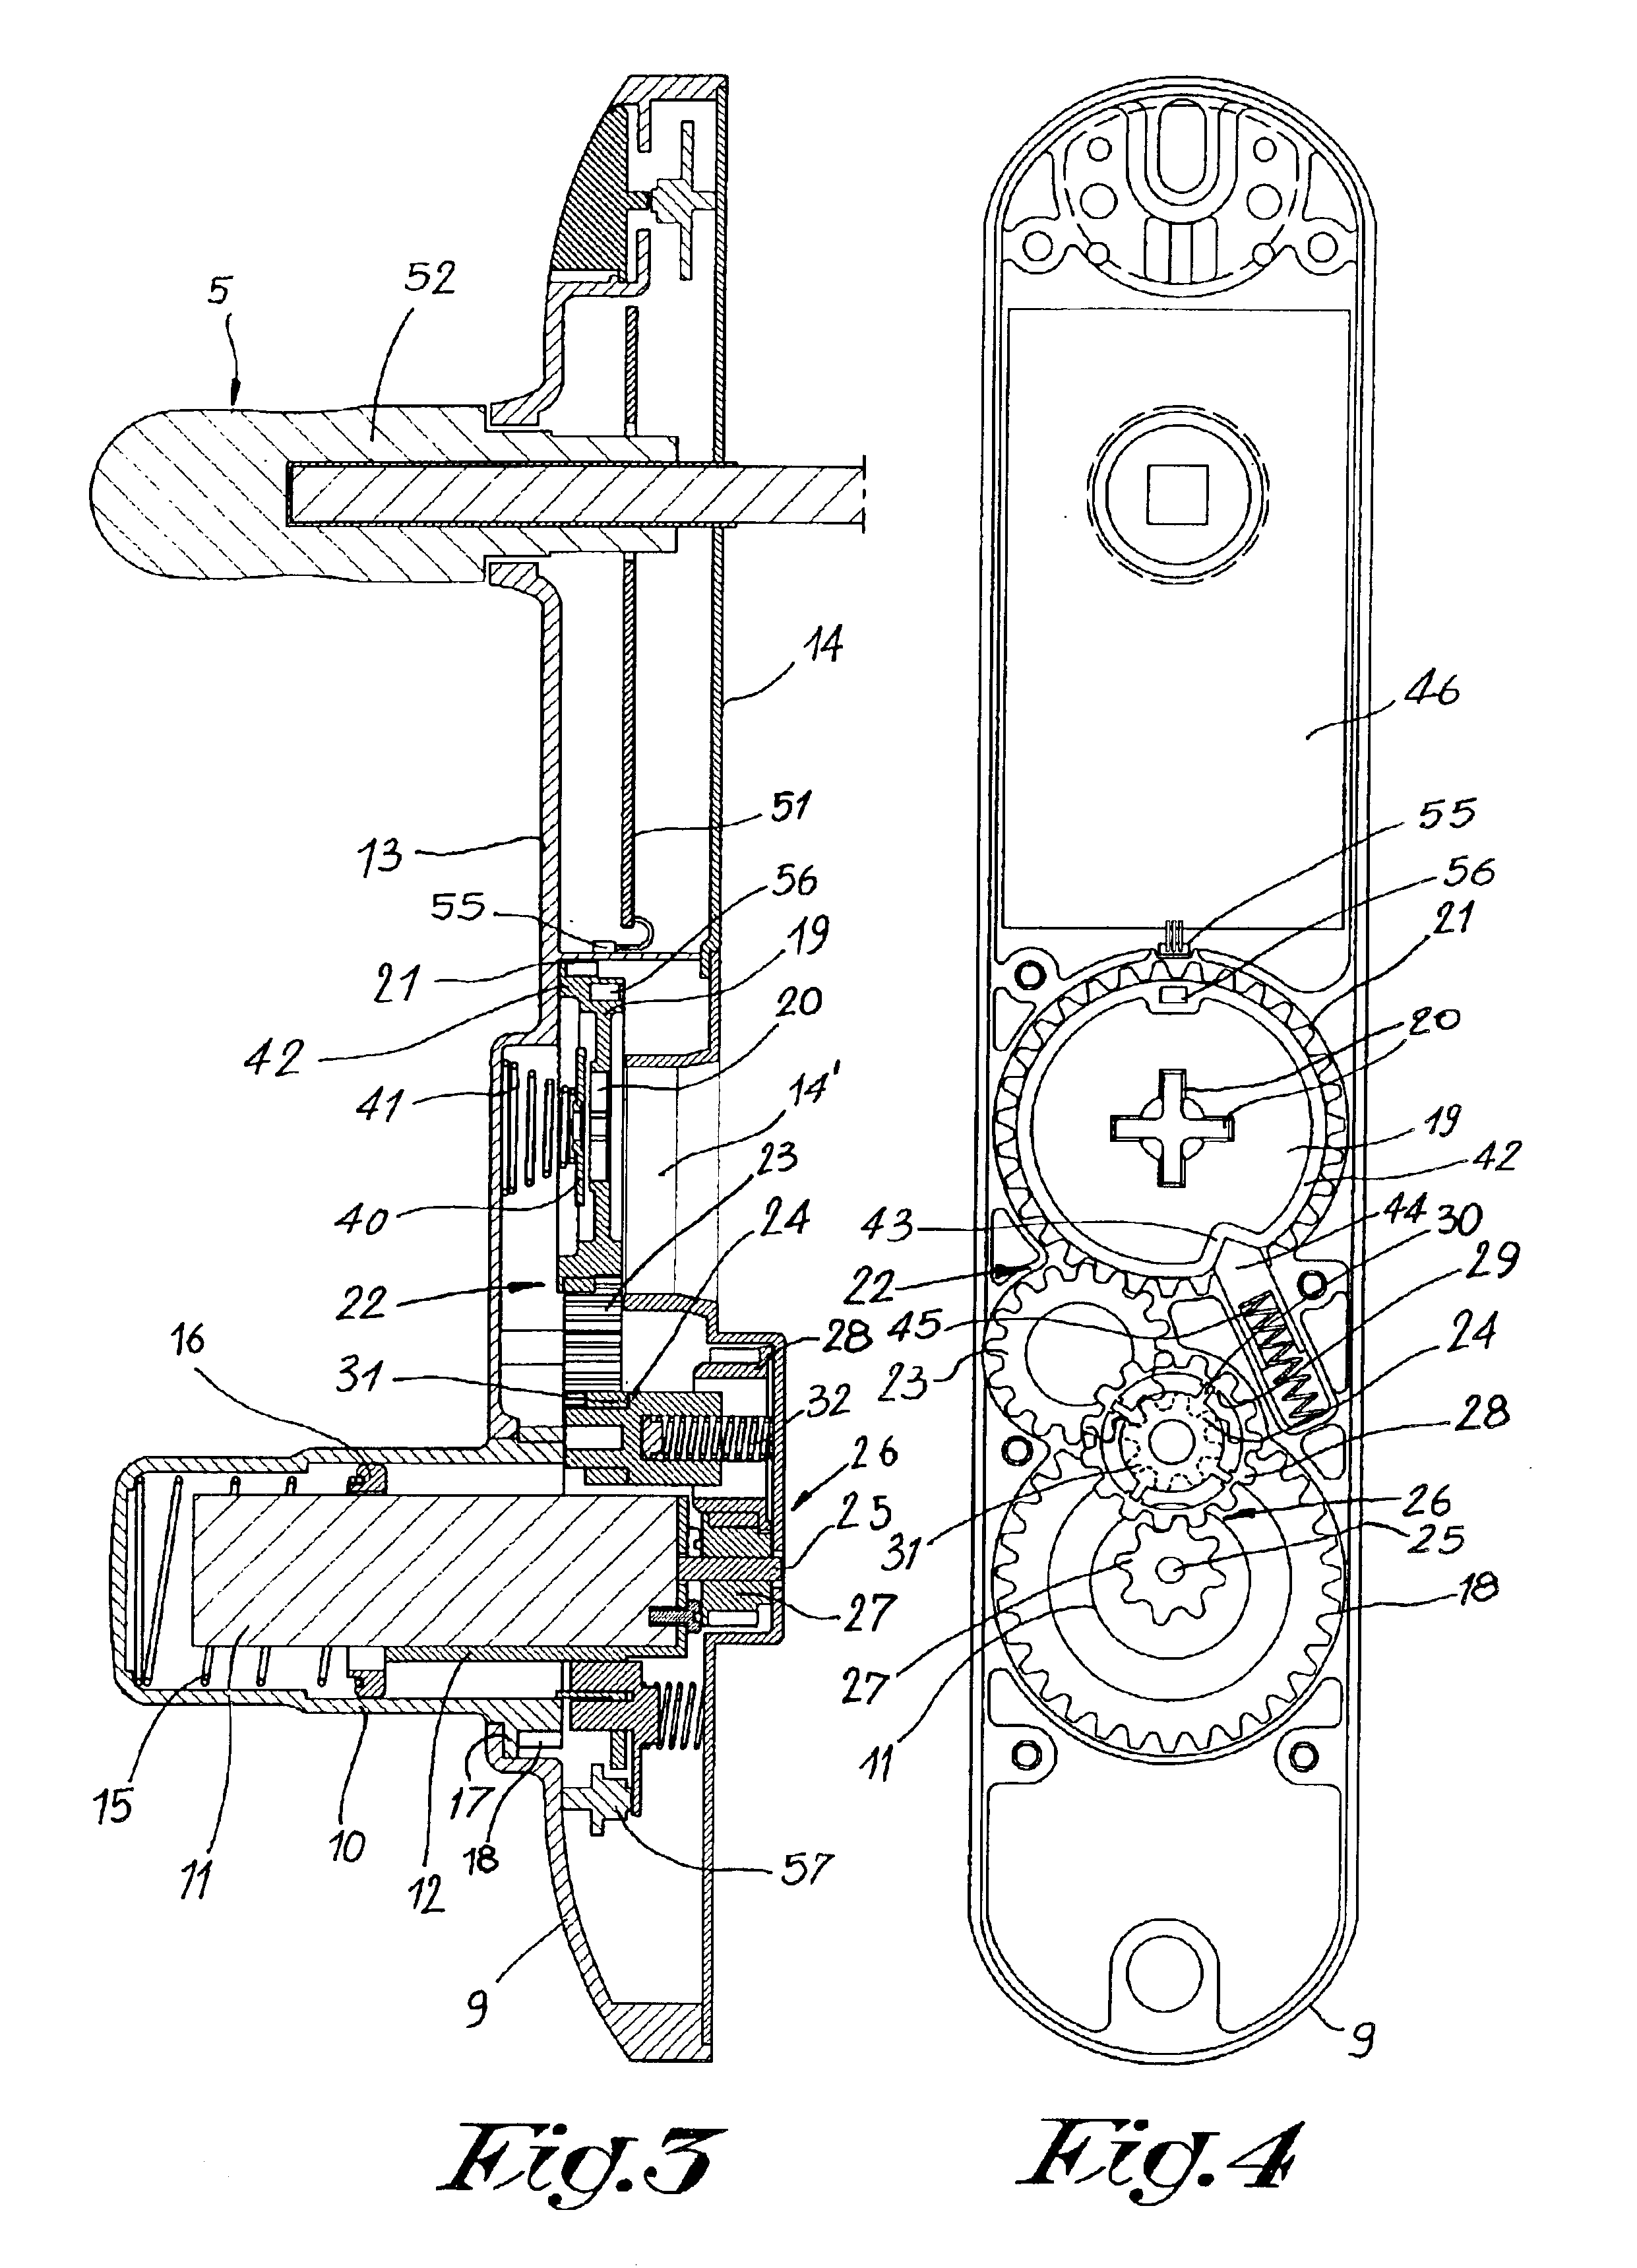 Control device for a lock mechanism